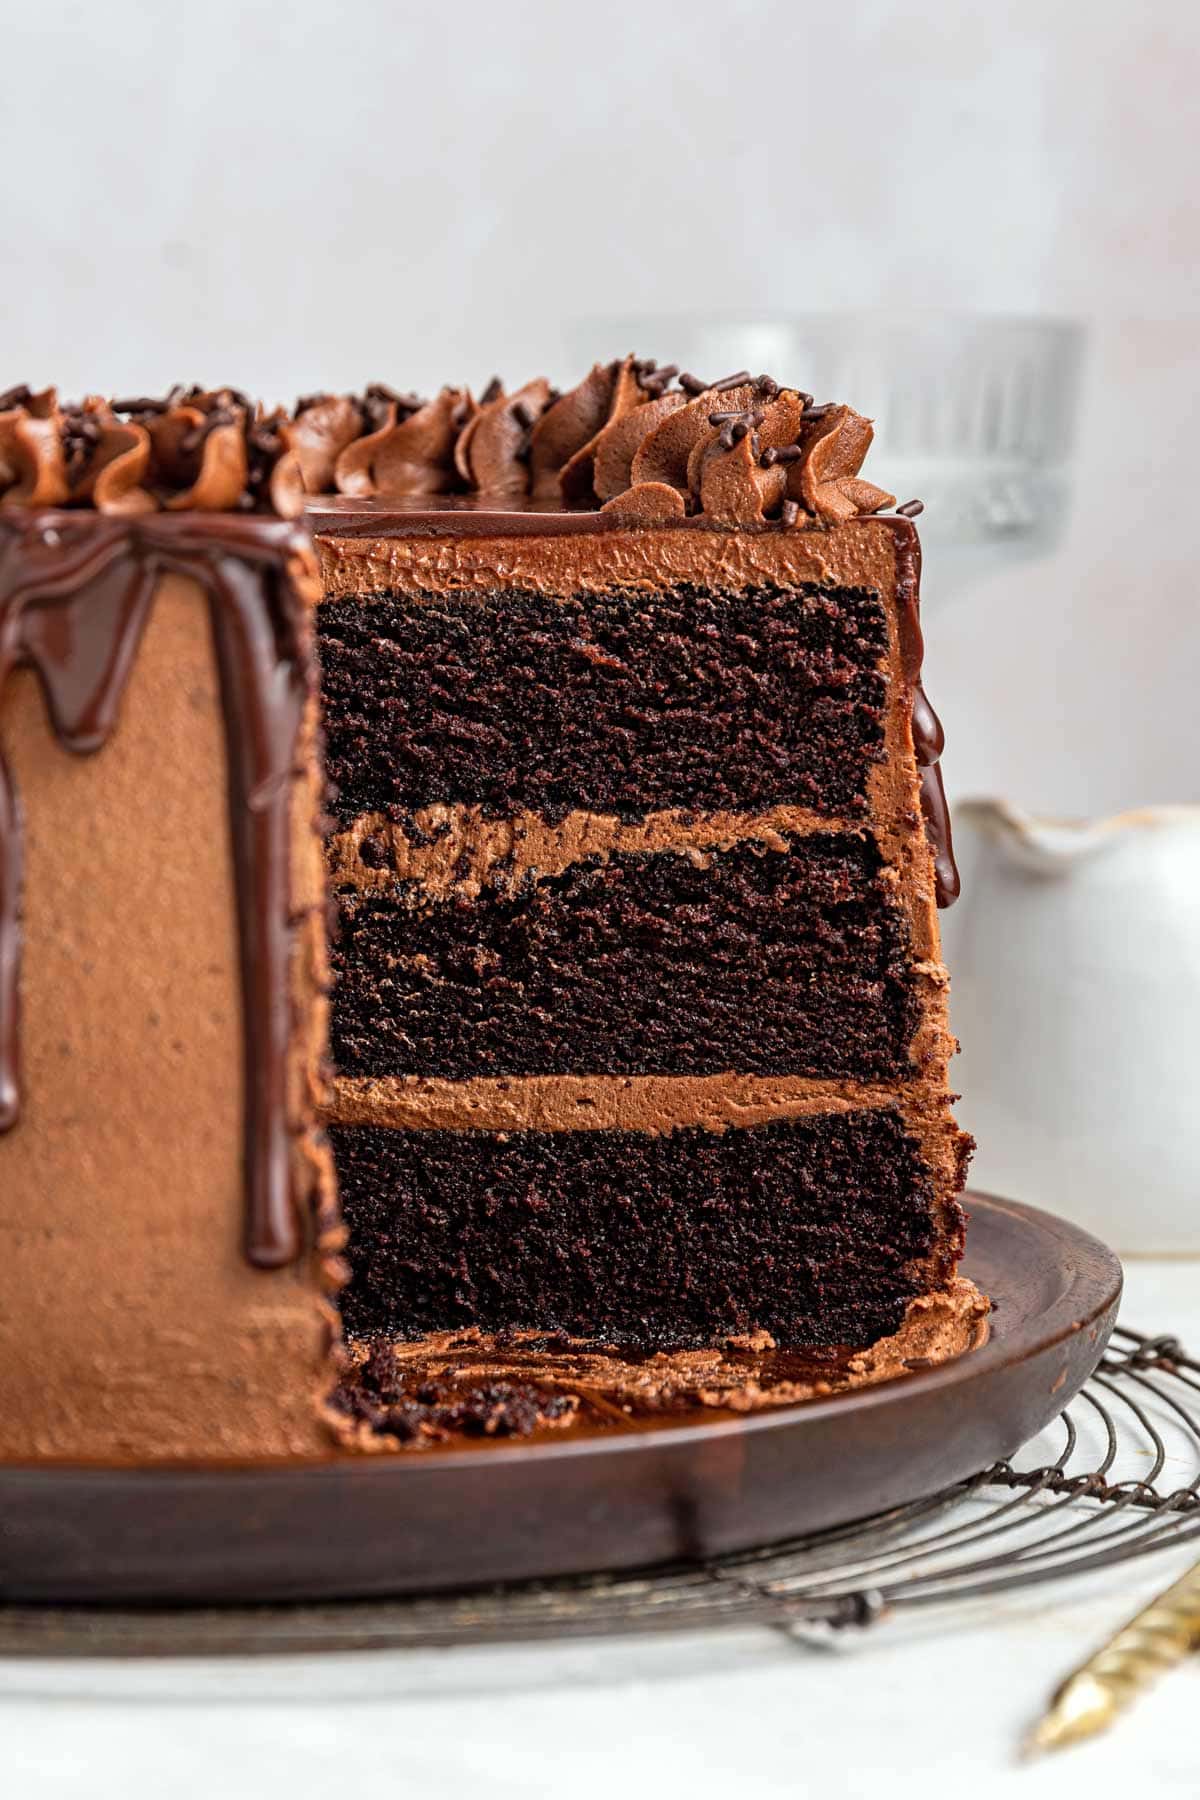 side view of a cut slice of a three layer chocolate cake showing the thick dark chocolate cake layers.